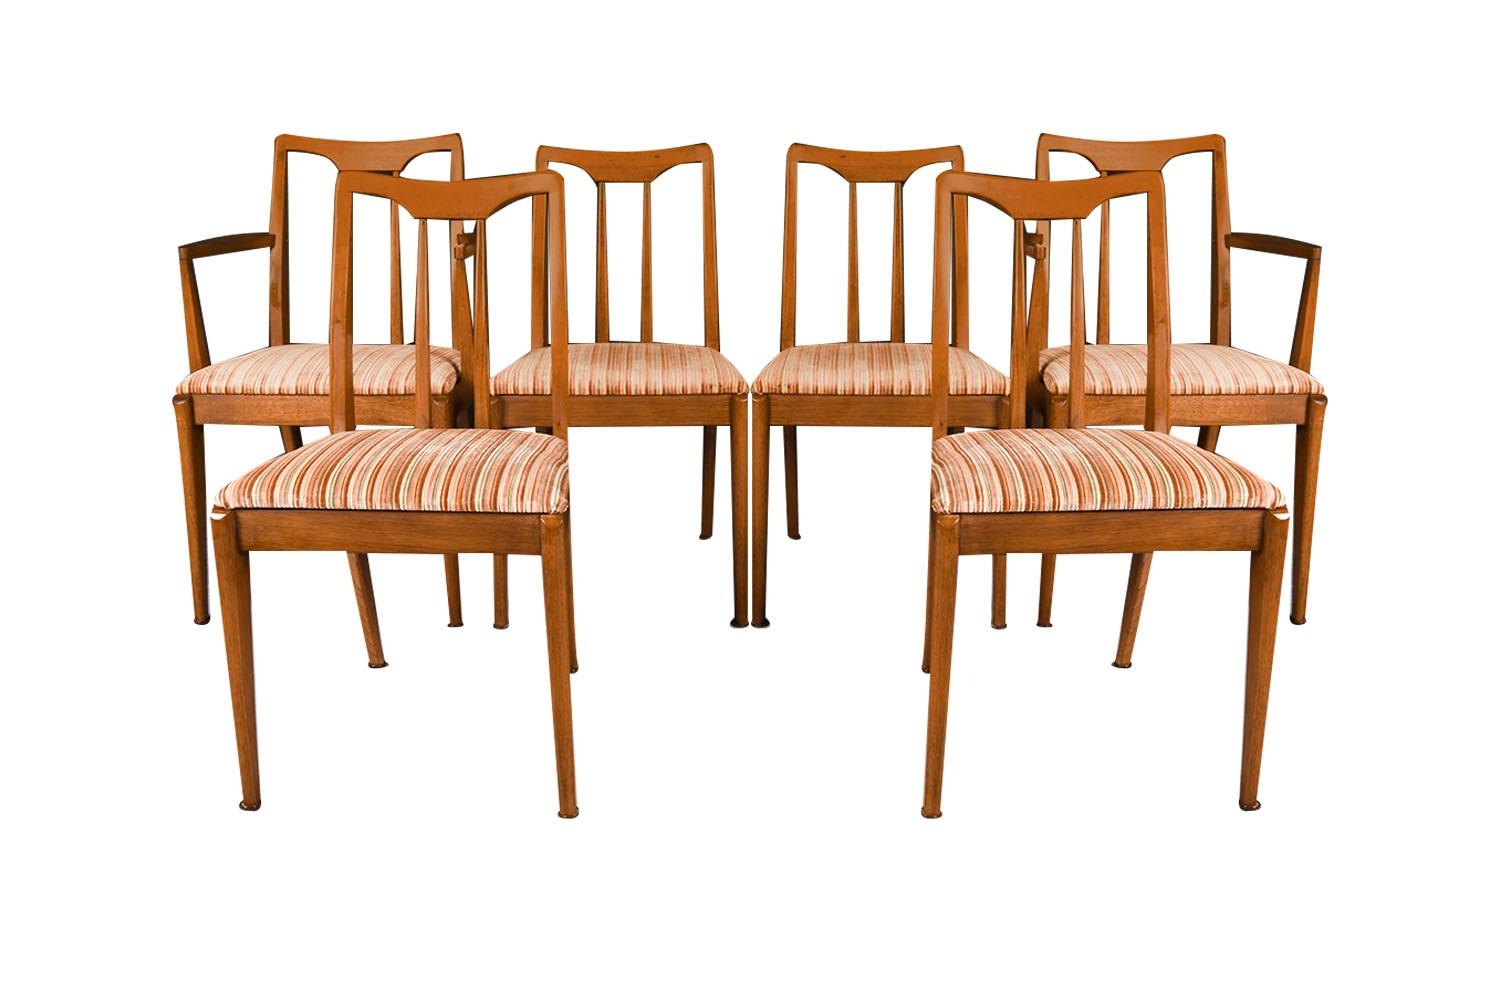 A set of six extremely sought after, gorgeous 1960s, modern walnut side/dining chairs designed by John Van Koert for the Drexel Projection line. Featuring a full matching set of six, two which are arm chairs, each remains in original condition